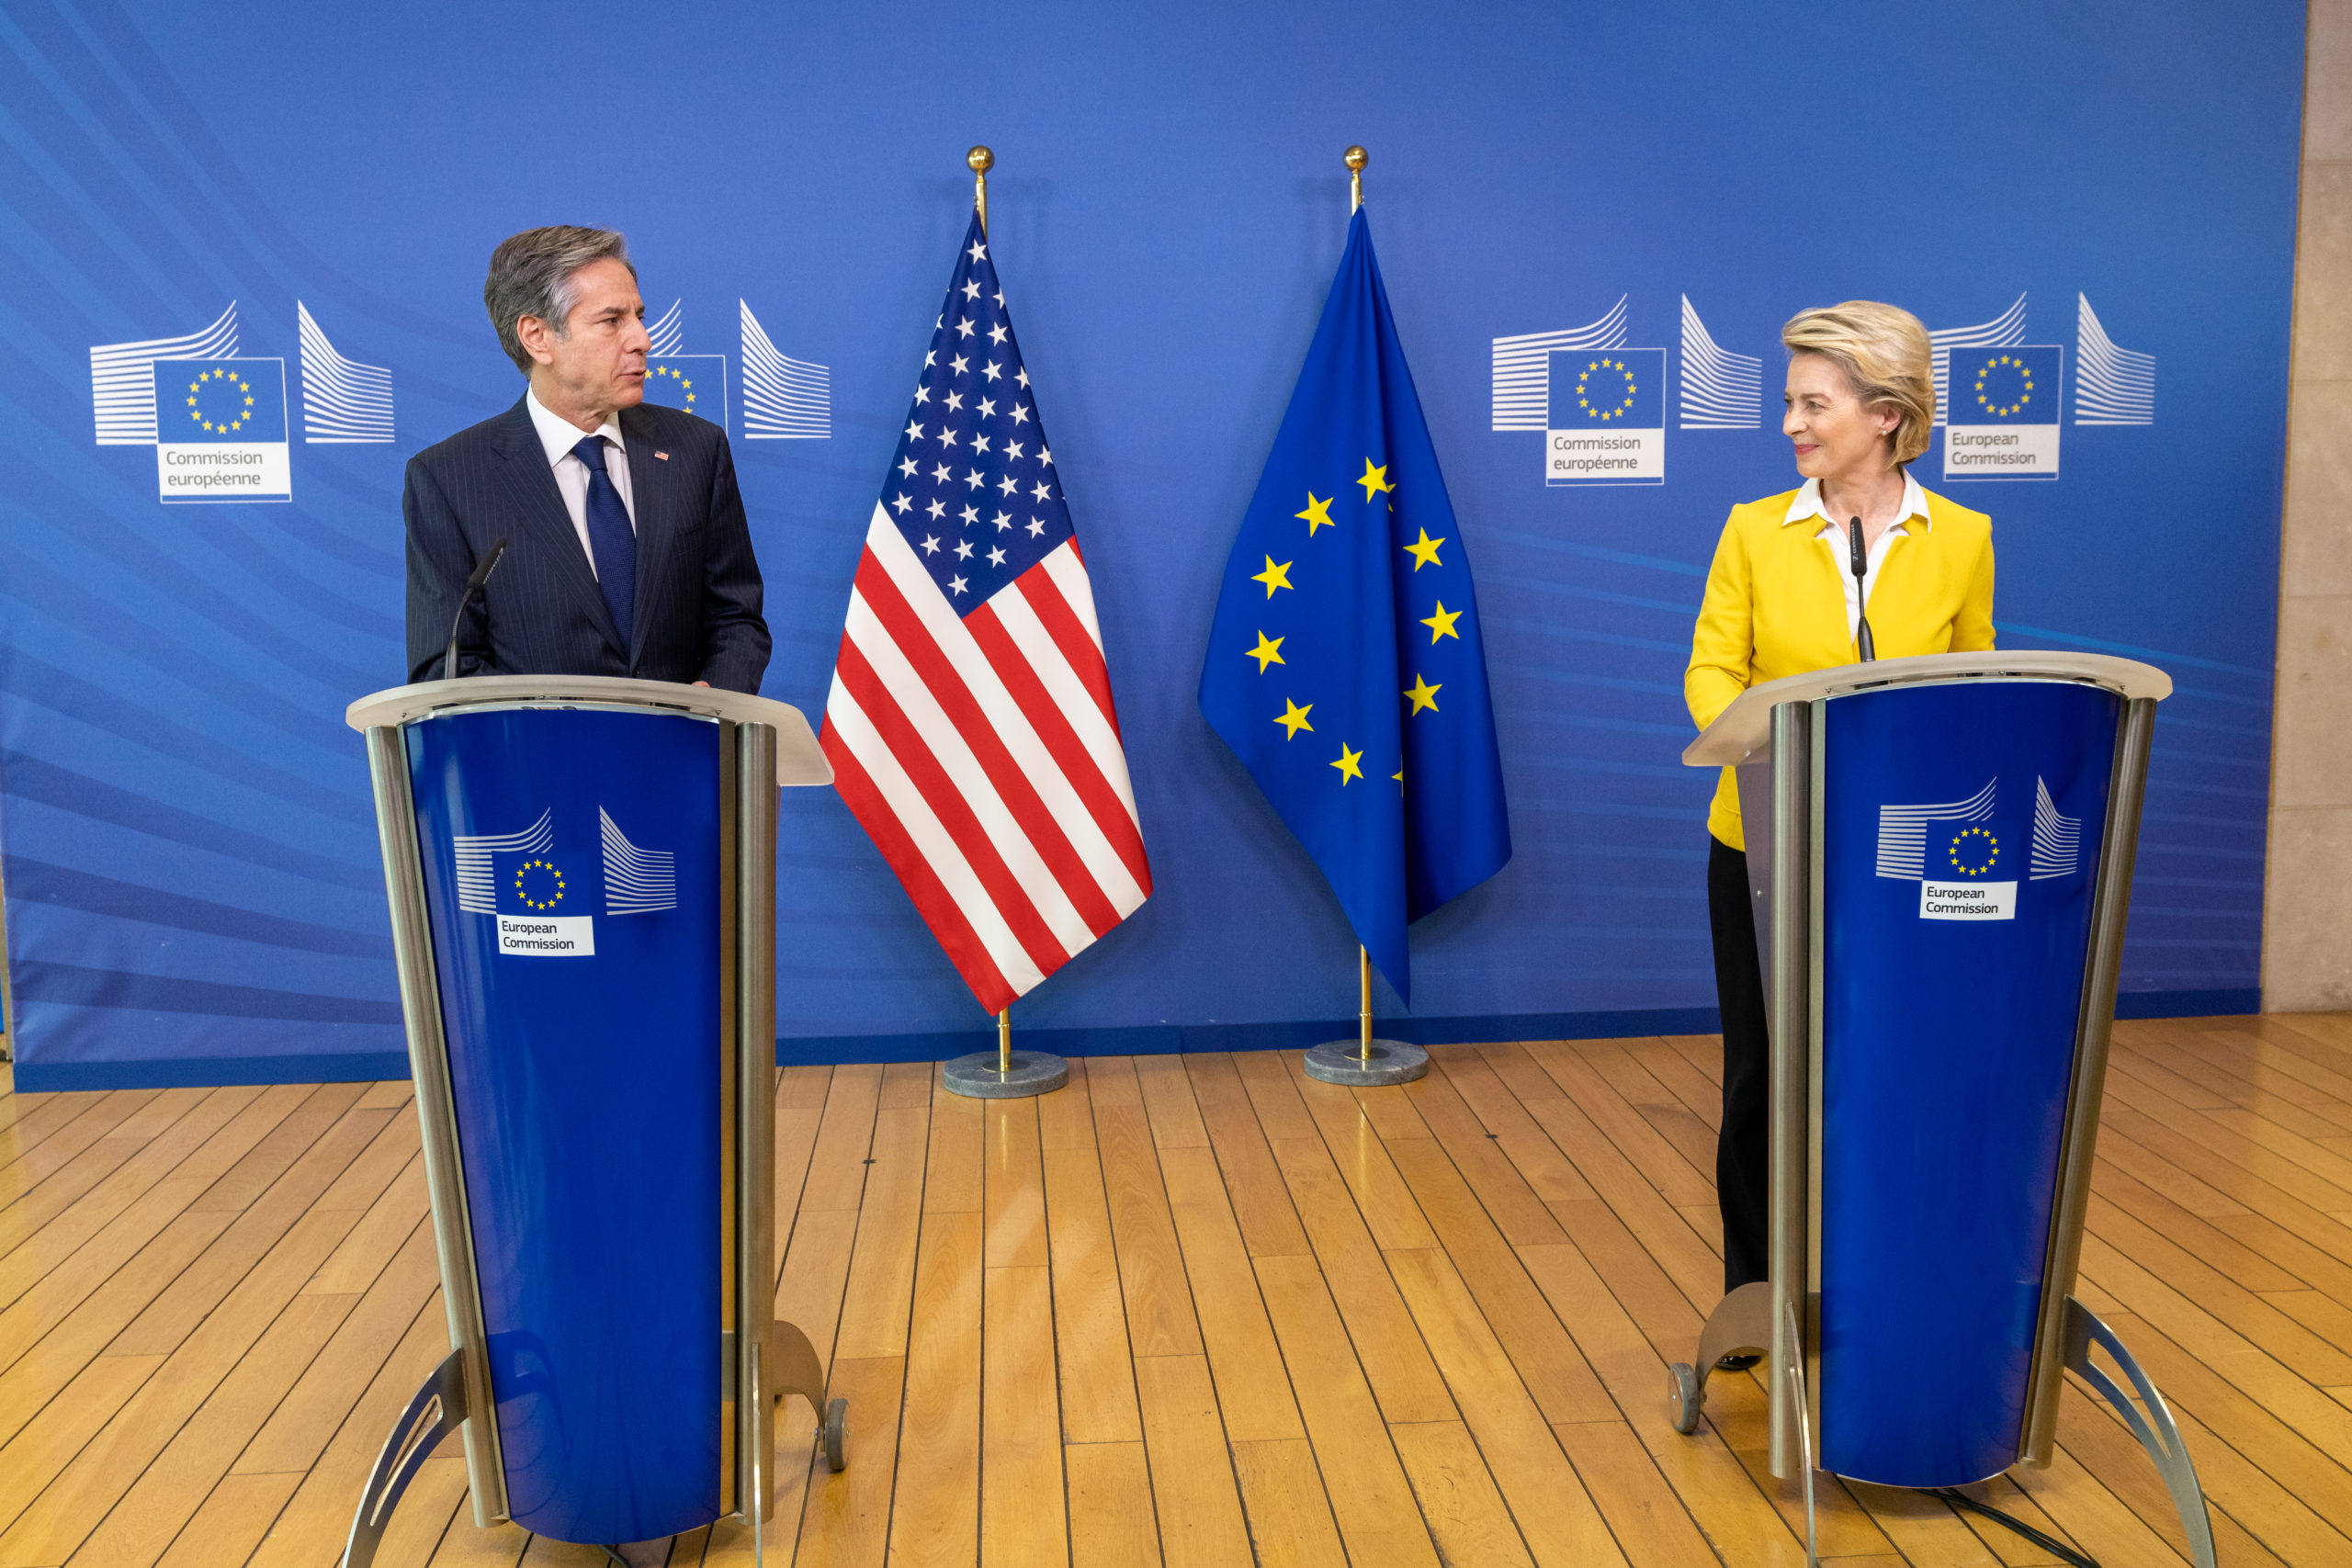 THE CABLE PODCAST: The future of the transatlantic alliance